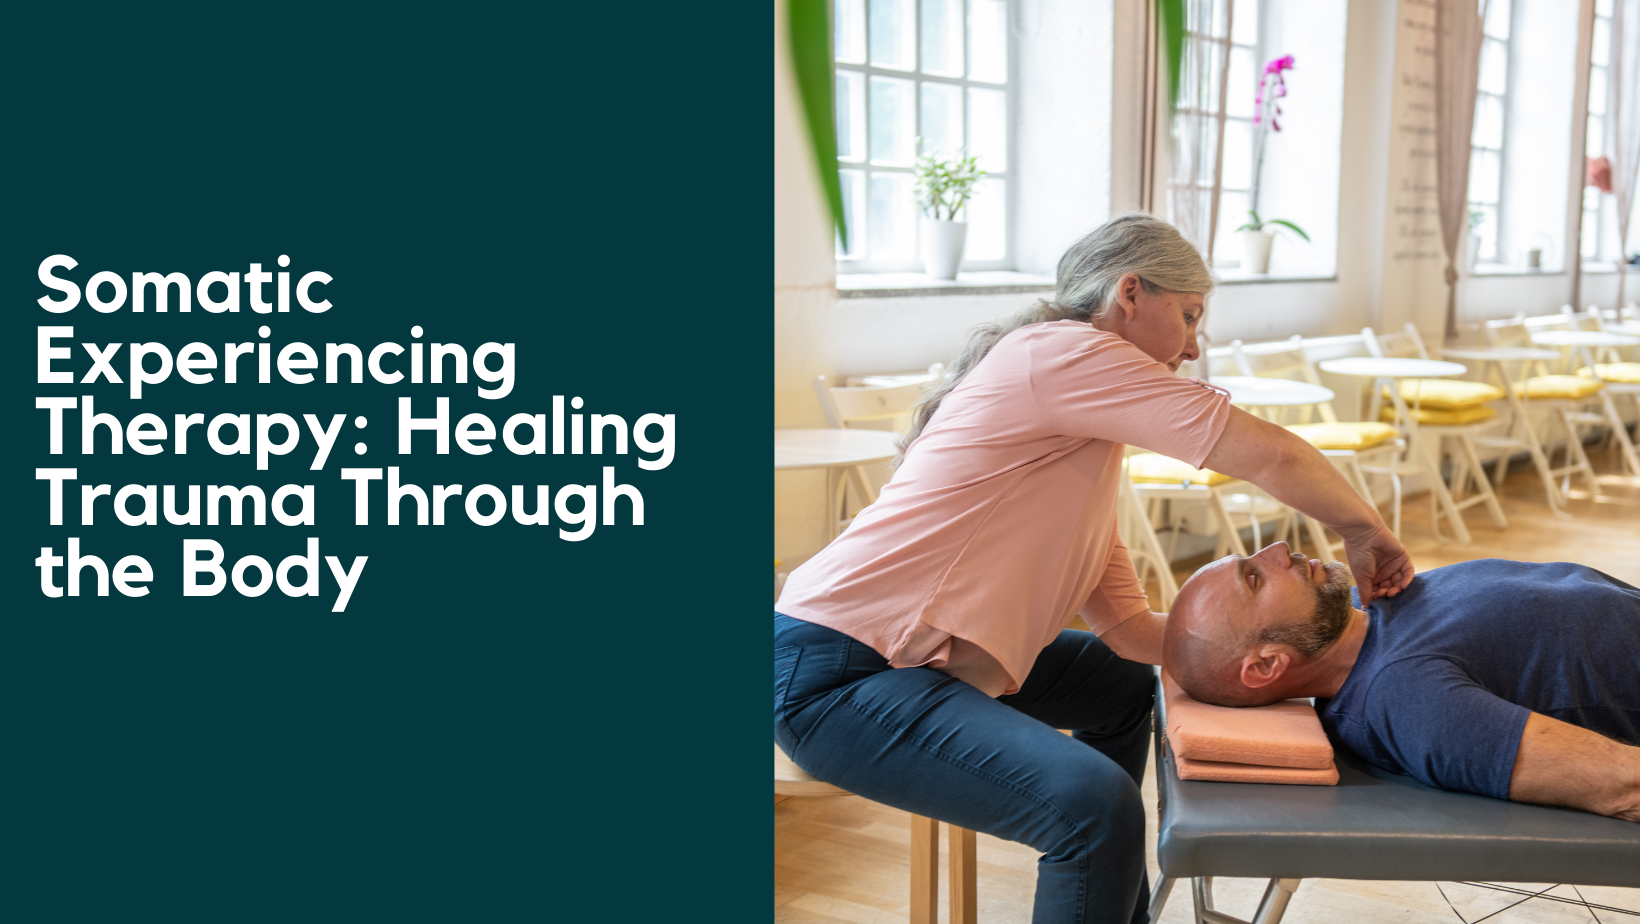 Somatic Experiencing Therapy: Healing Trauma Through the Body